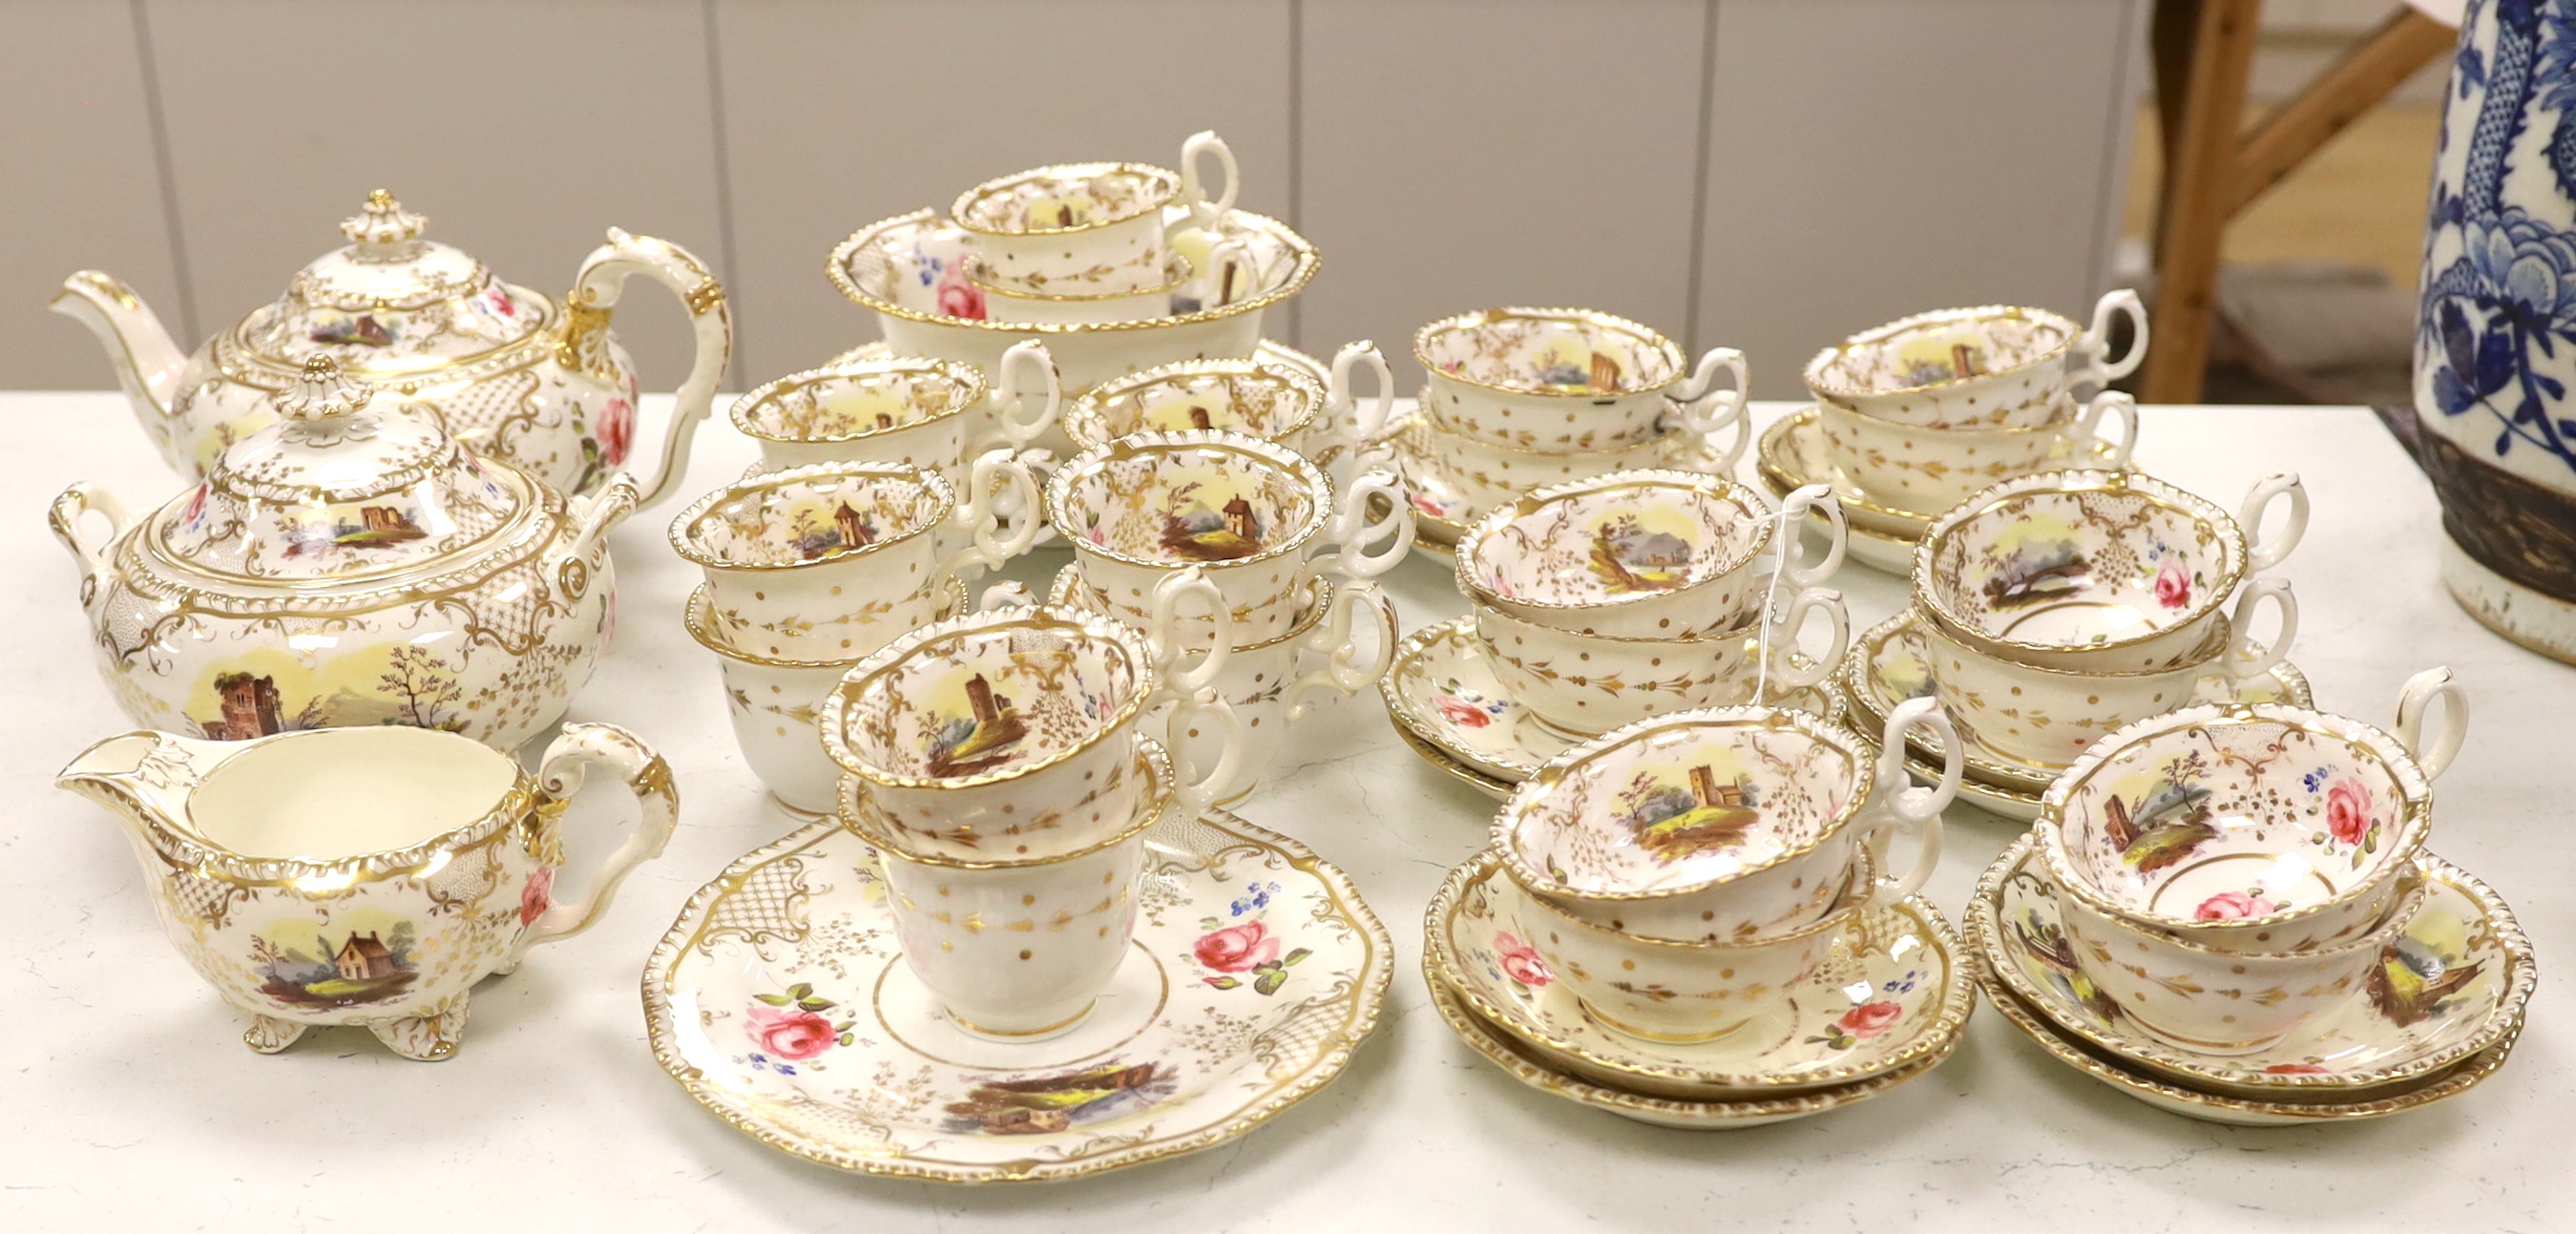 An early 19th century H & R Daniel landscape painted tea and coffee set, including twelve tea cups and saucers, twelve coffee cups, a teapot, a jug and a covered serving bowl, teapot 15cm high